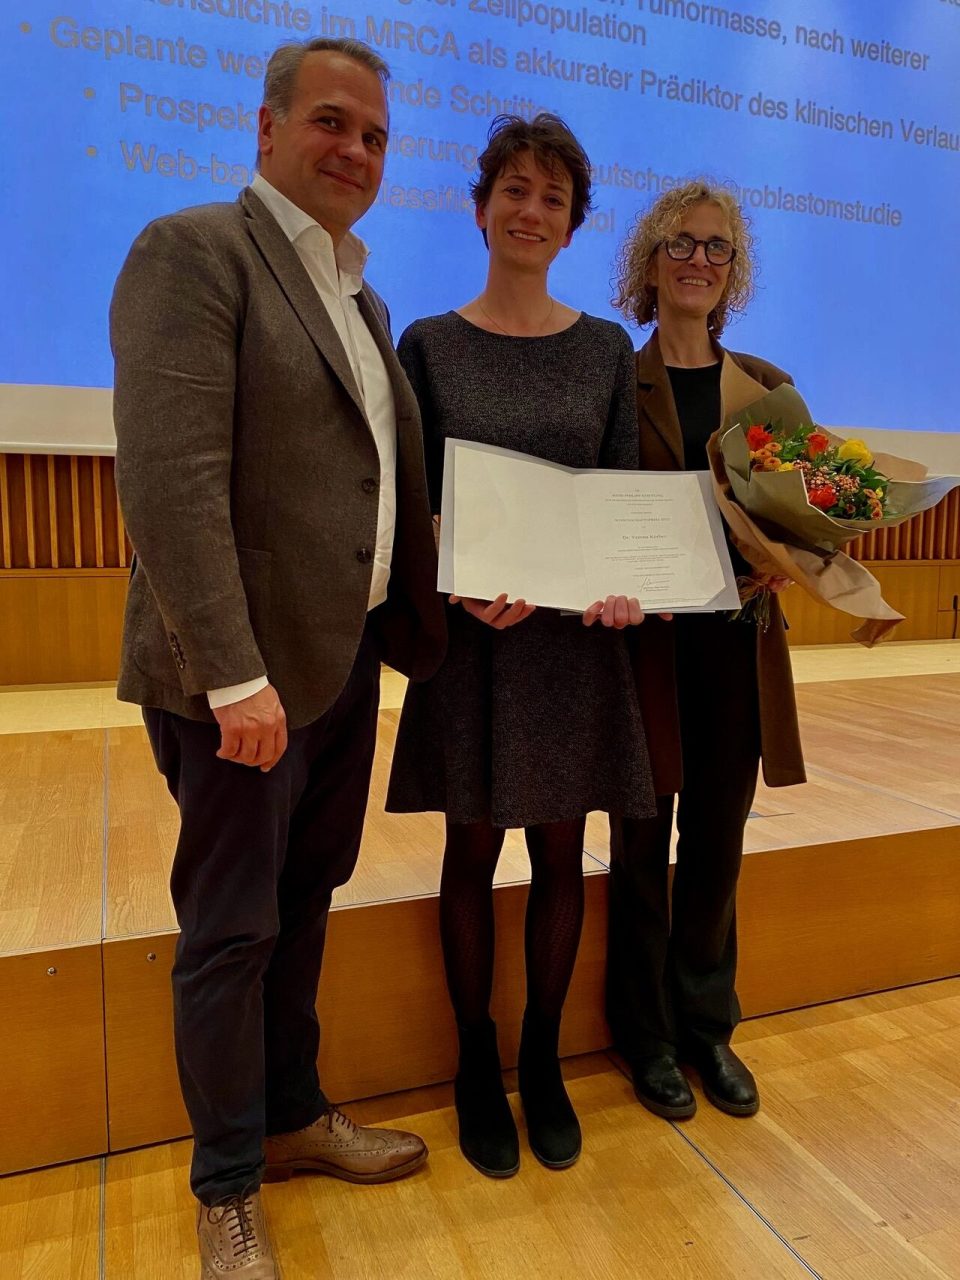 Uta Dirksen: Verena Körber has been awarded the Kind Philipp Prize 2022 at the GPOH meeting